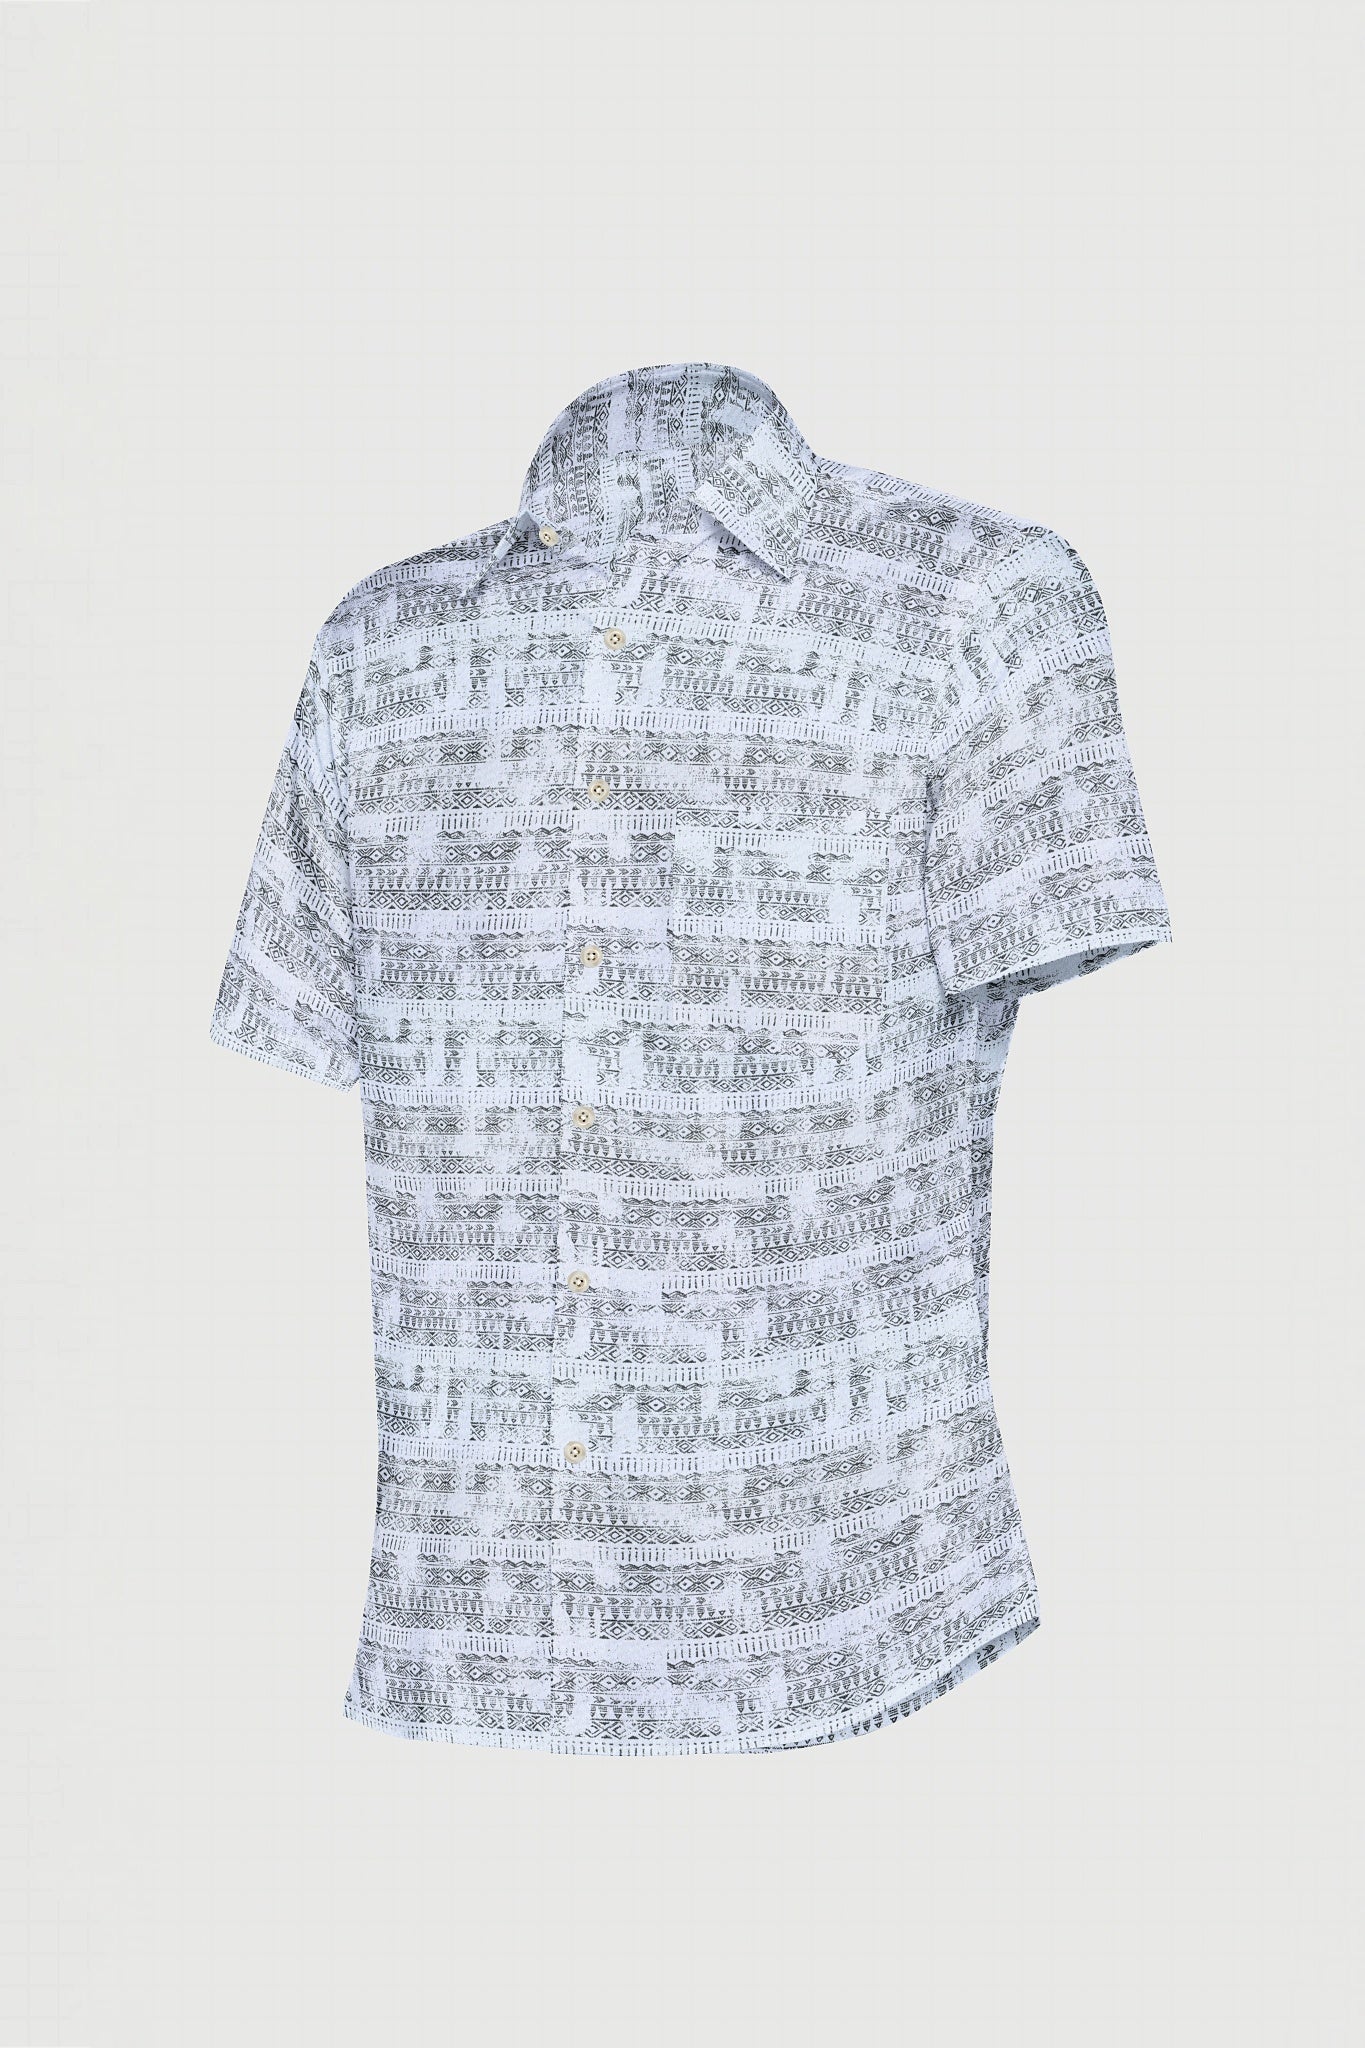 Dolphin Gray and Black Lace Pattern Printed Cotton Shirt